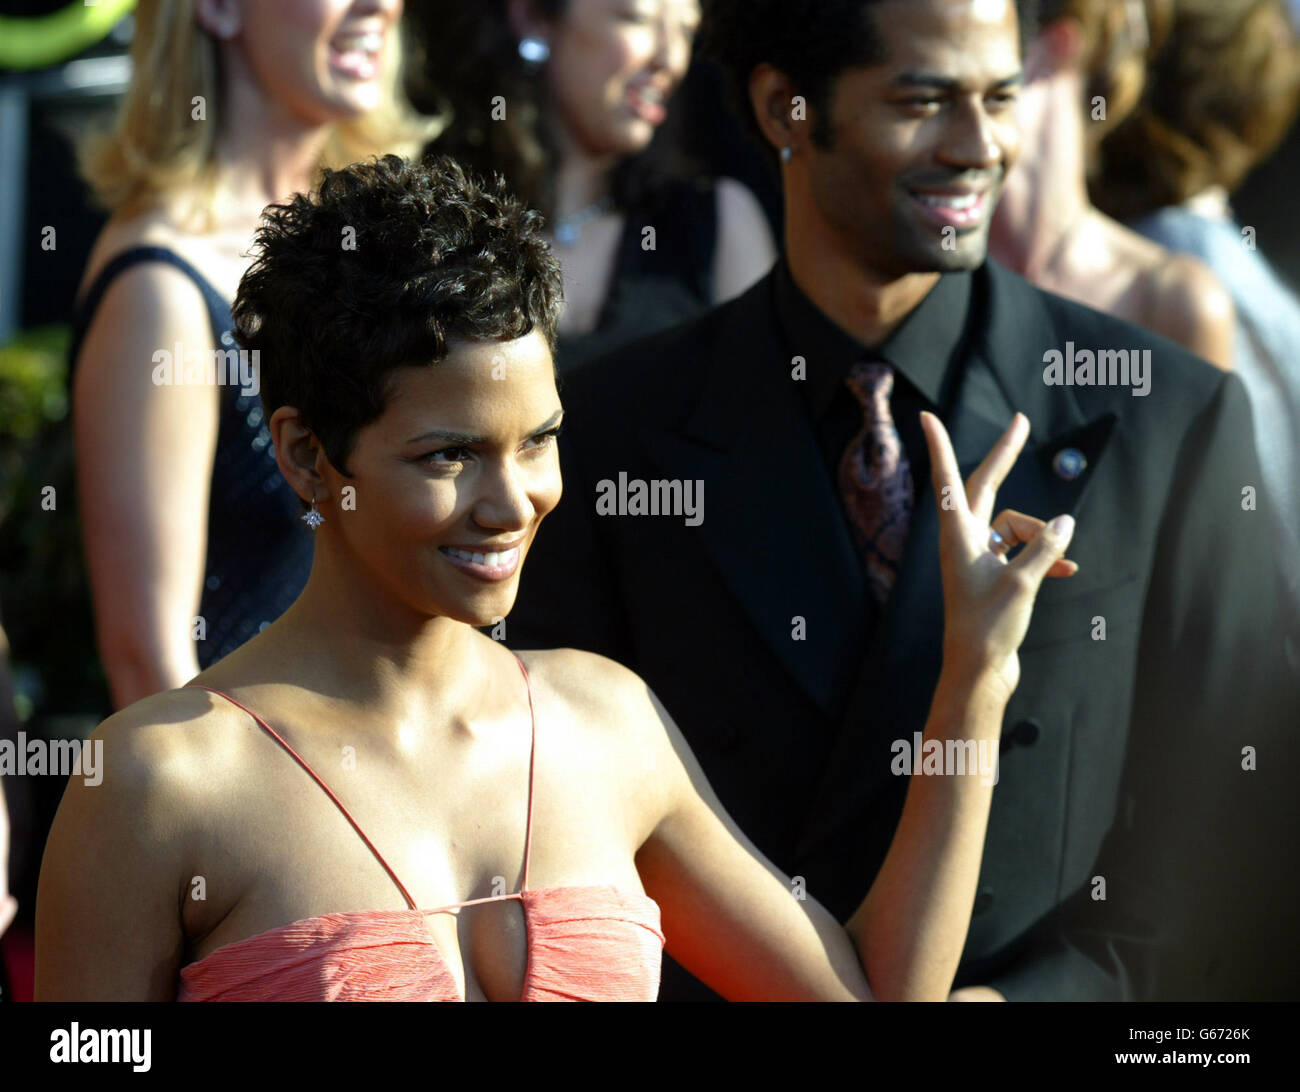 Actress Halle Berry flashes a peace sign as she arrives on the red carpet for the 9th annual Screen Actors Guild Awards at the Shrine Auditorium in Los Angeles. 21/04/2003: Oscar winner Halle Berry is expected to attend a British premiere of the X-Men 2 later this month, it was confirmed, Monday April 21, 2003. The screen siren has been invited to the fundraising event in Edinburgh, which aims to raise cash for diabetes research. Berry, who herself has diabetes, is being invited by fellow sufferer Brian Cox, who stars alongside her in the science fiction movie. Stock Photo